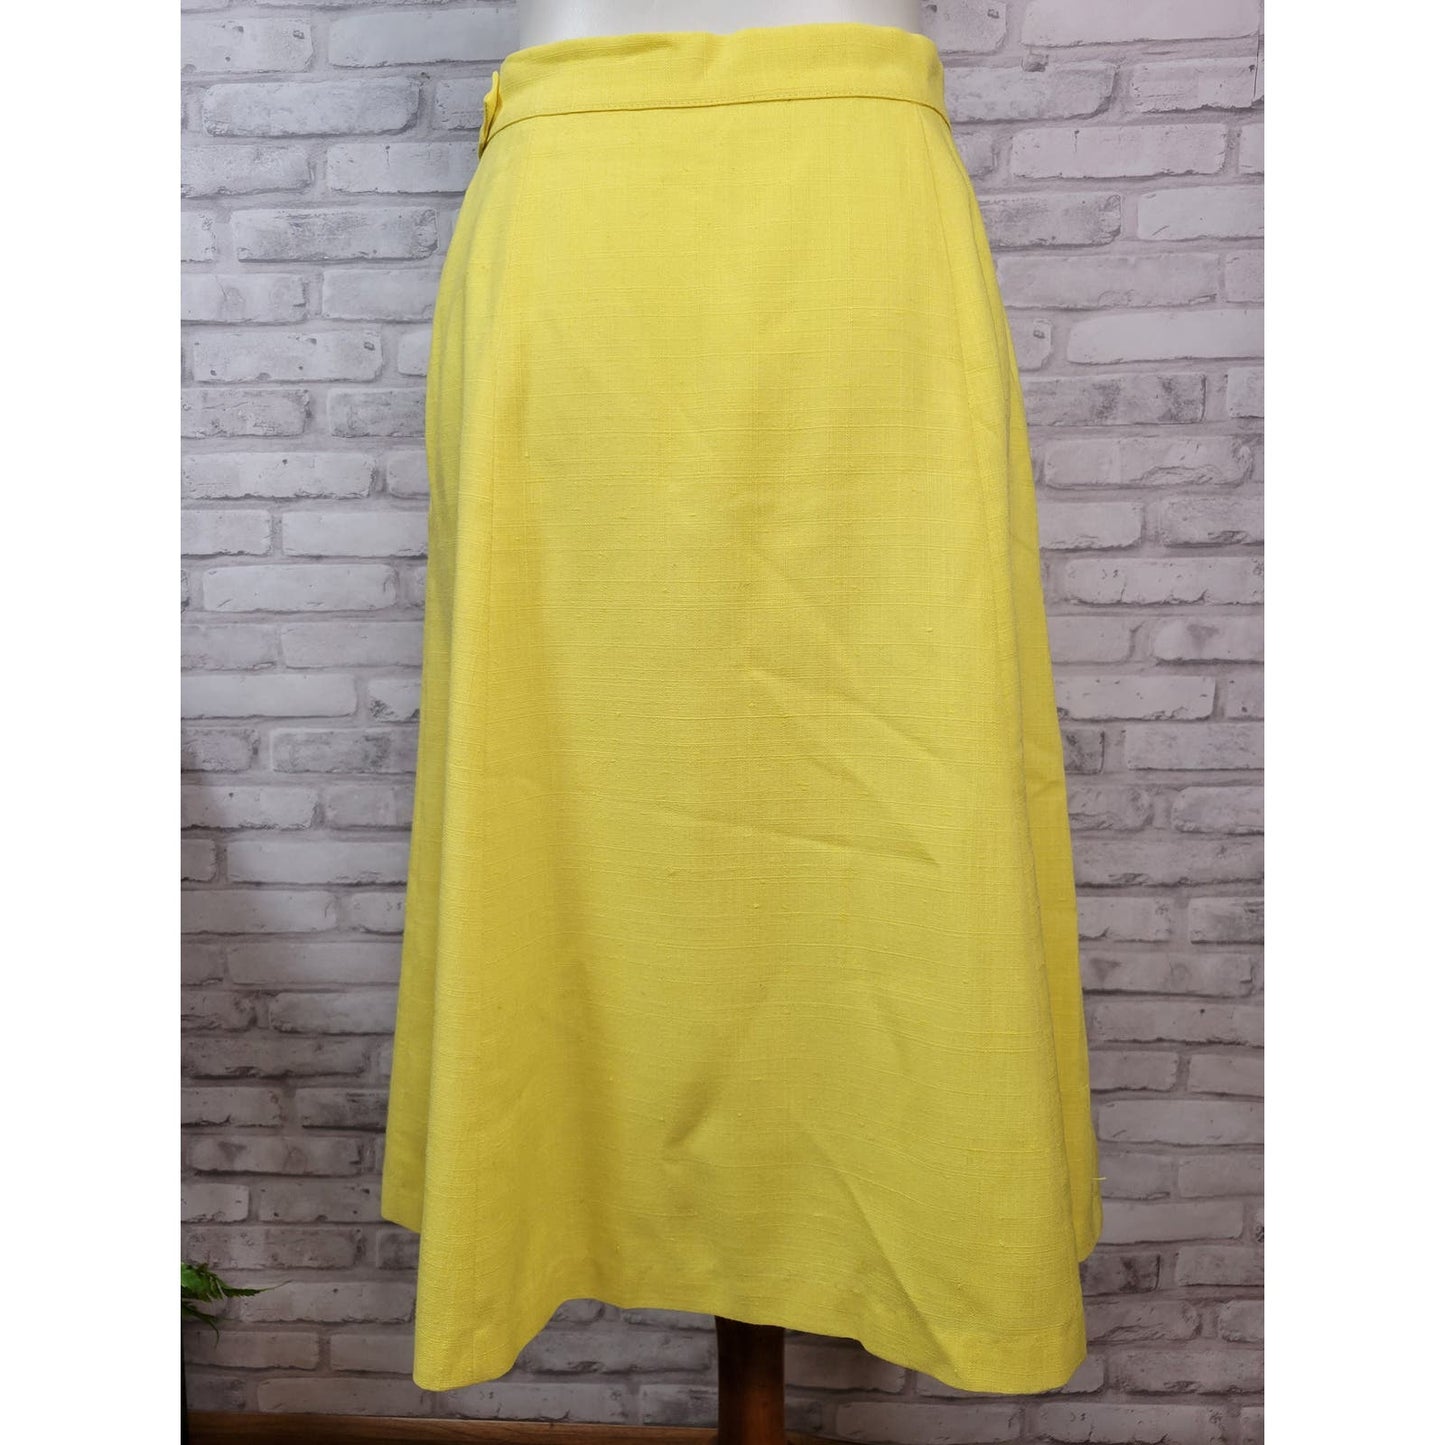 1960s A-line knee-length skirt sunny yellow cotton blend with buckle detail 28-inch waist